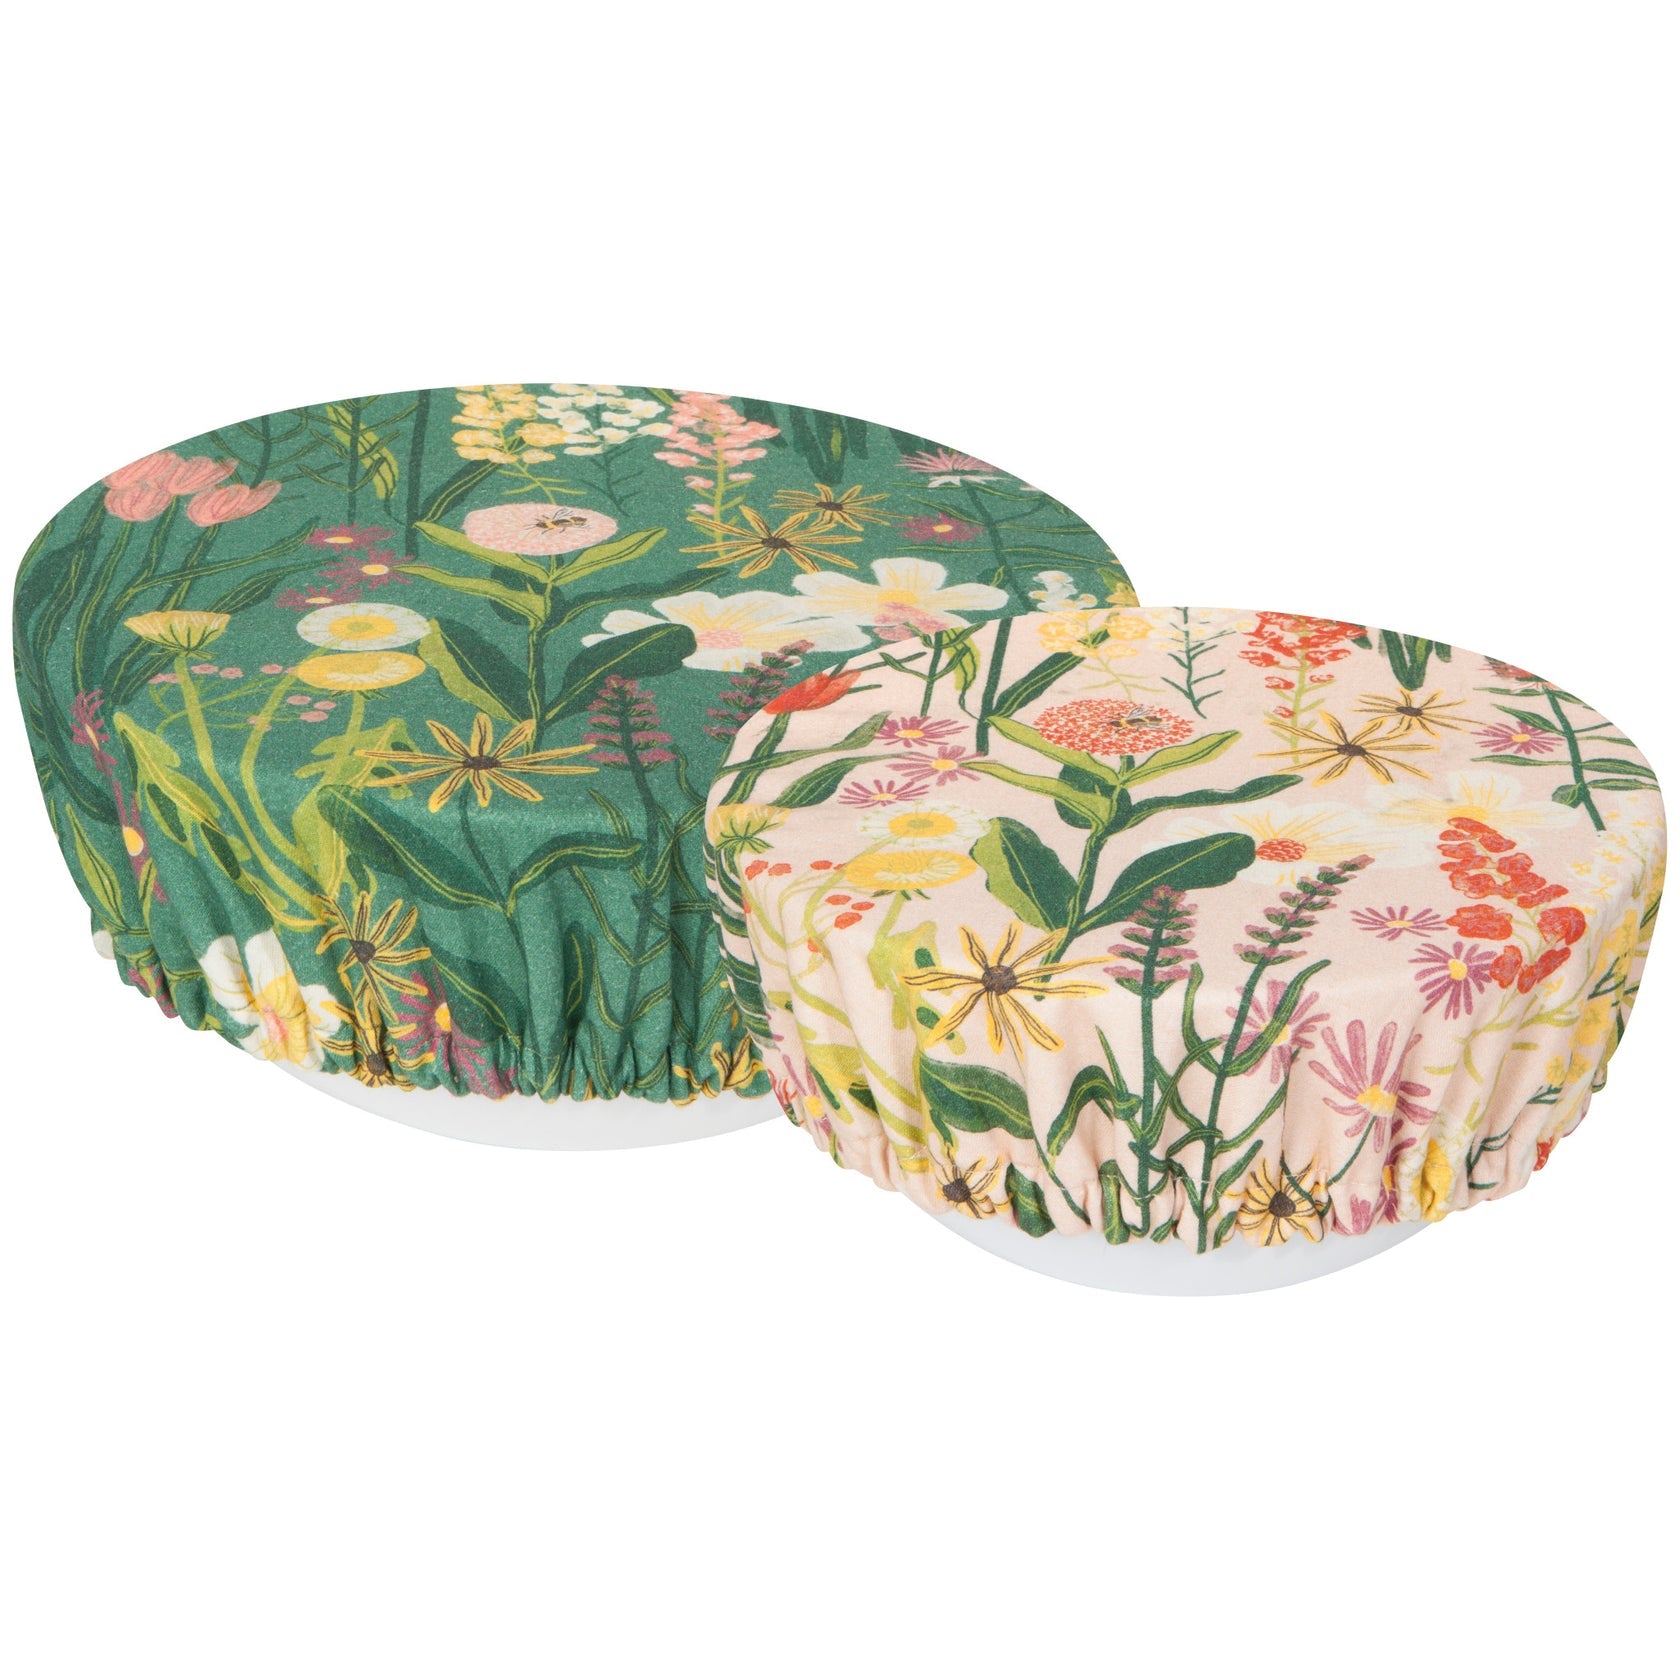 Danica Bowl Covers - Set of Two